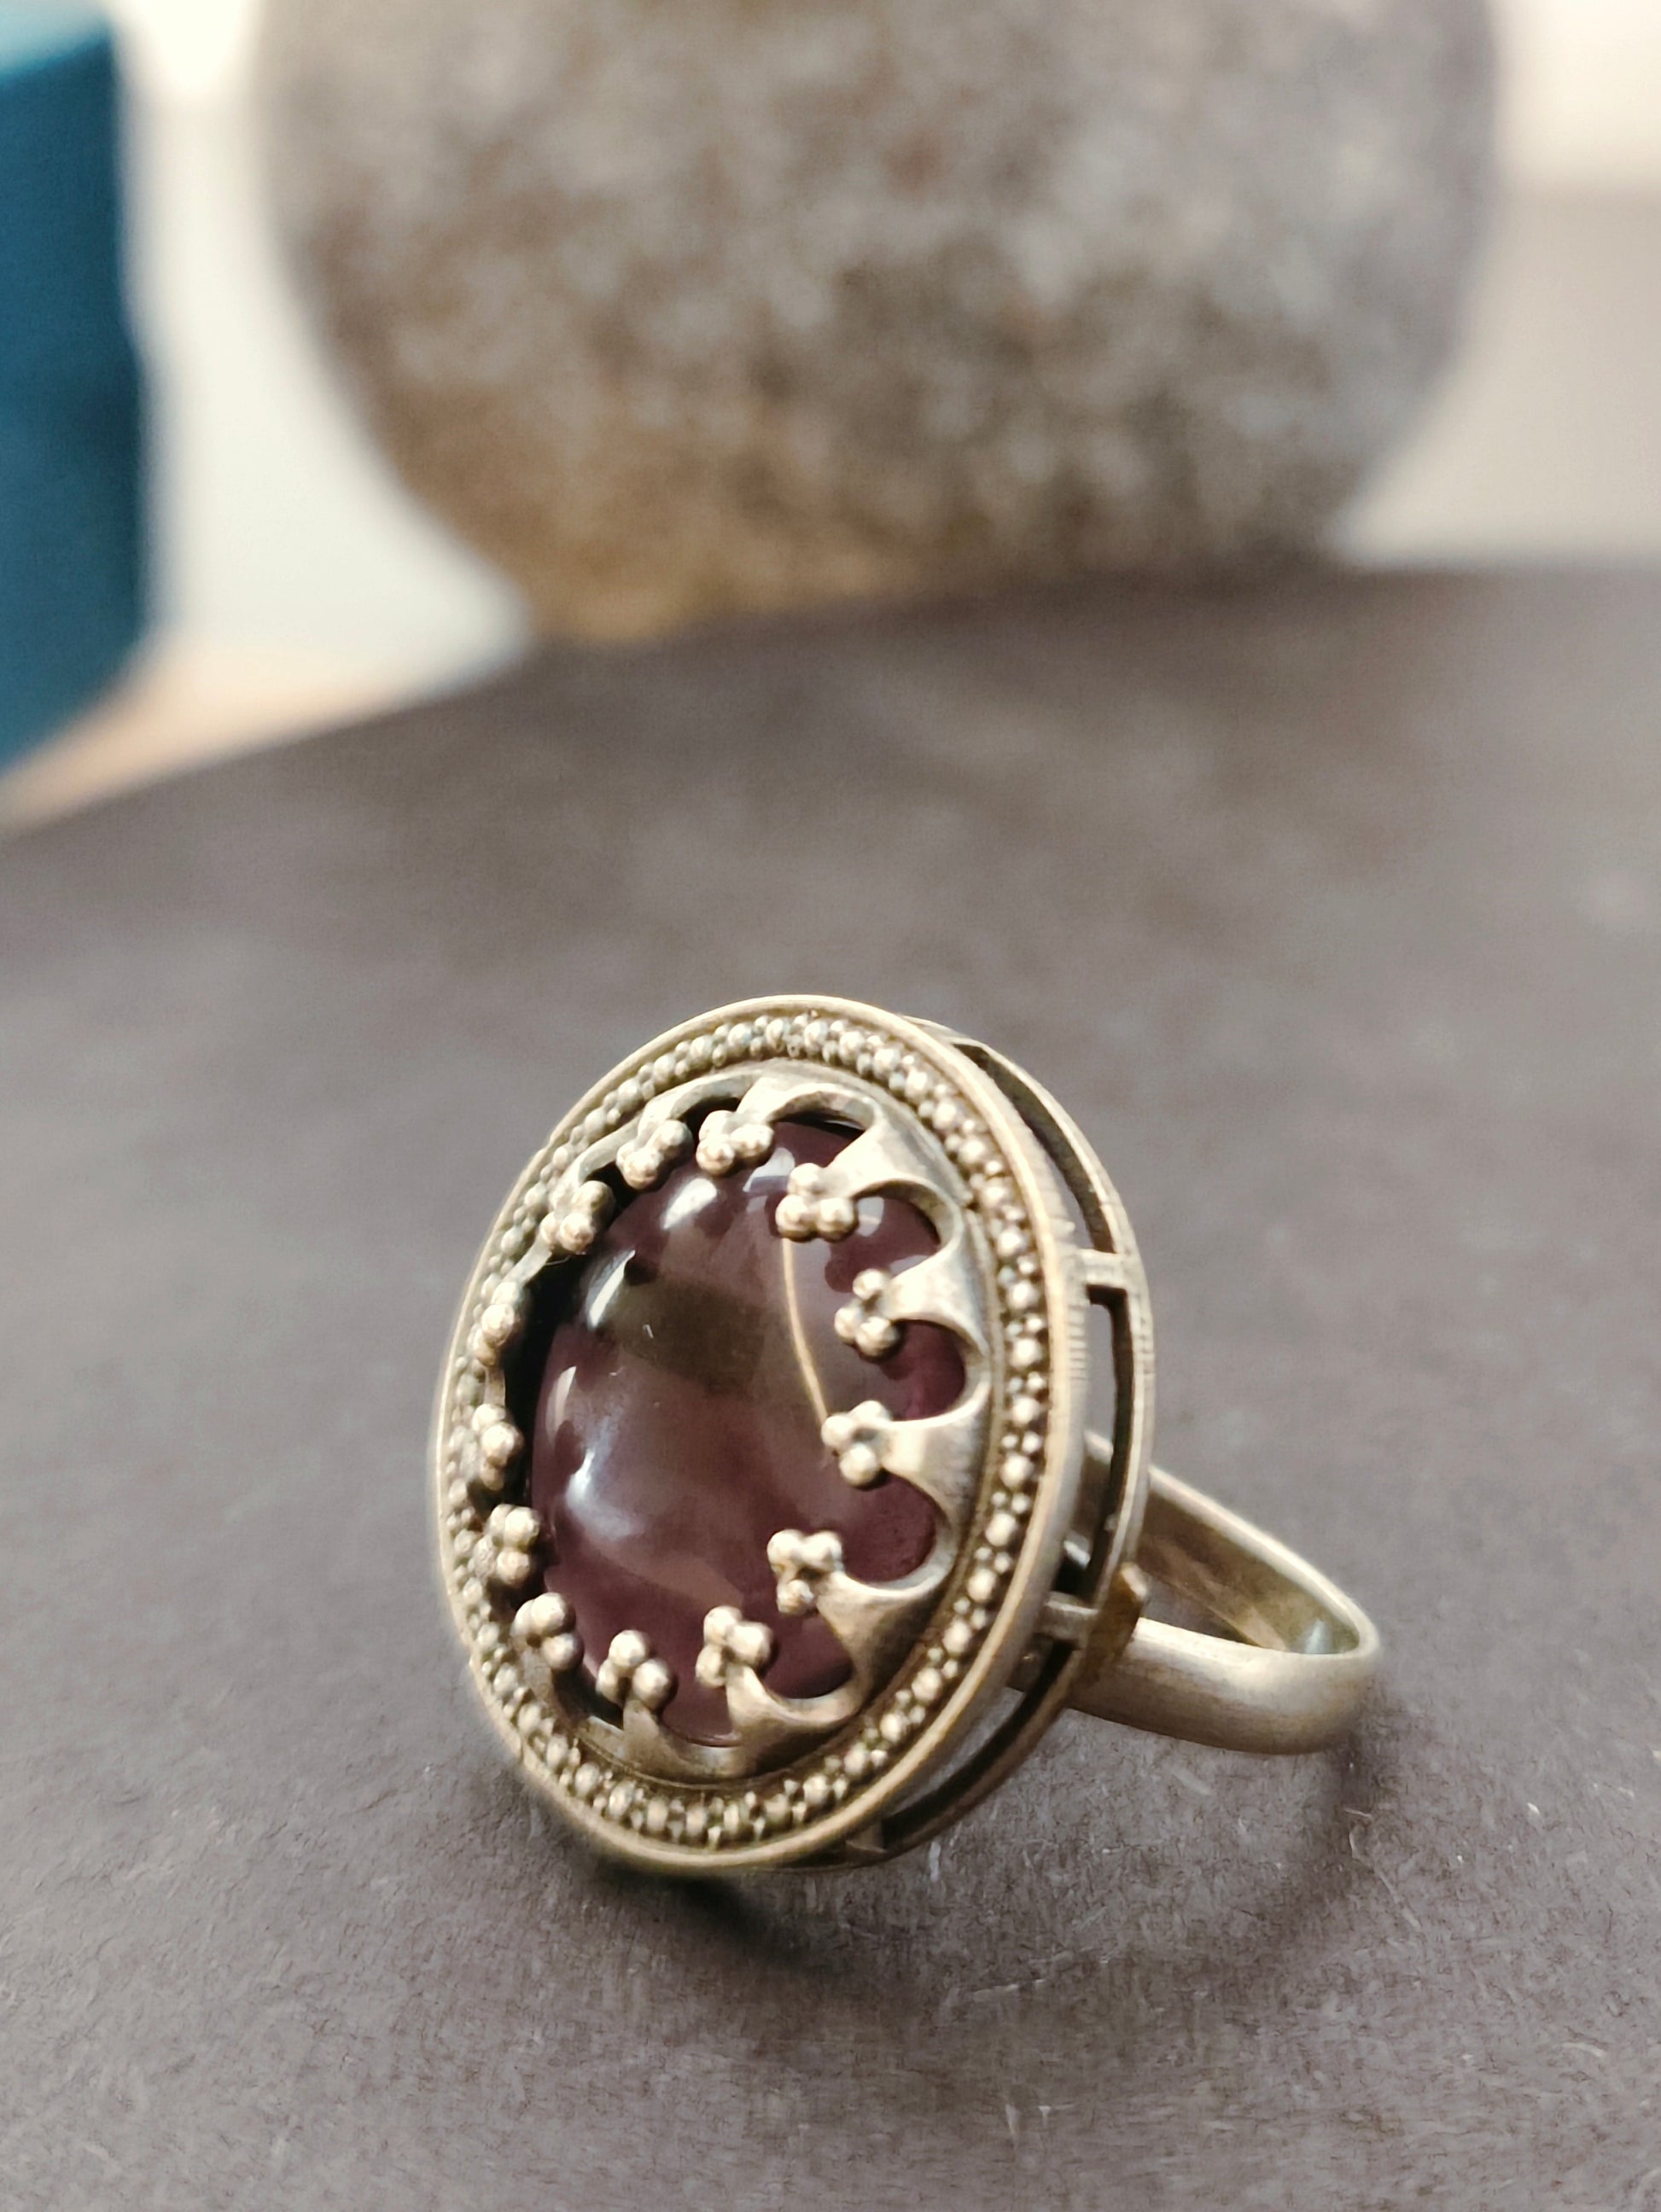 Aganya Multi Color Adjustable Rings with Antique Finish and Big Stone | Festive Occasions | for Traditional Look | for Office Indian Look - Mrigaya India